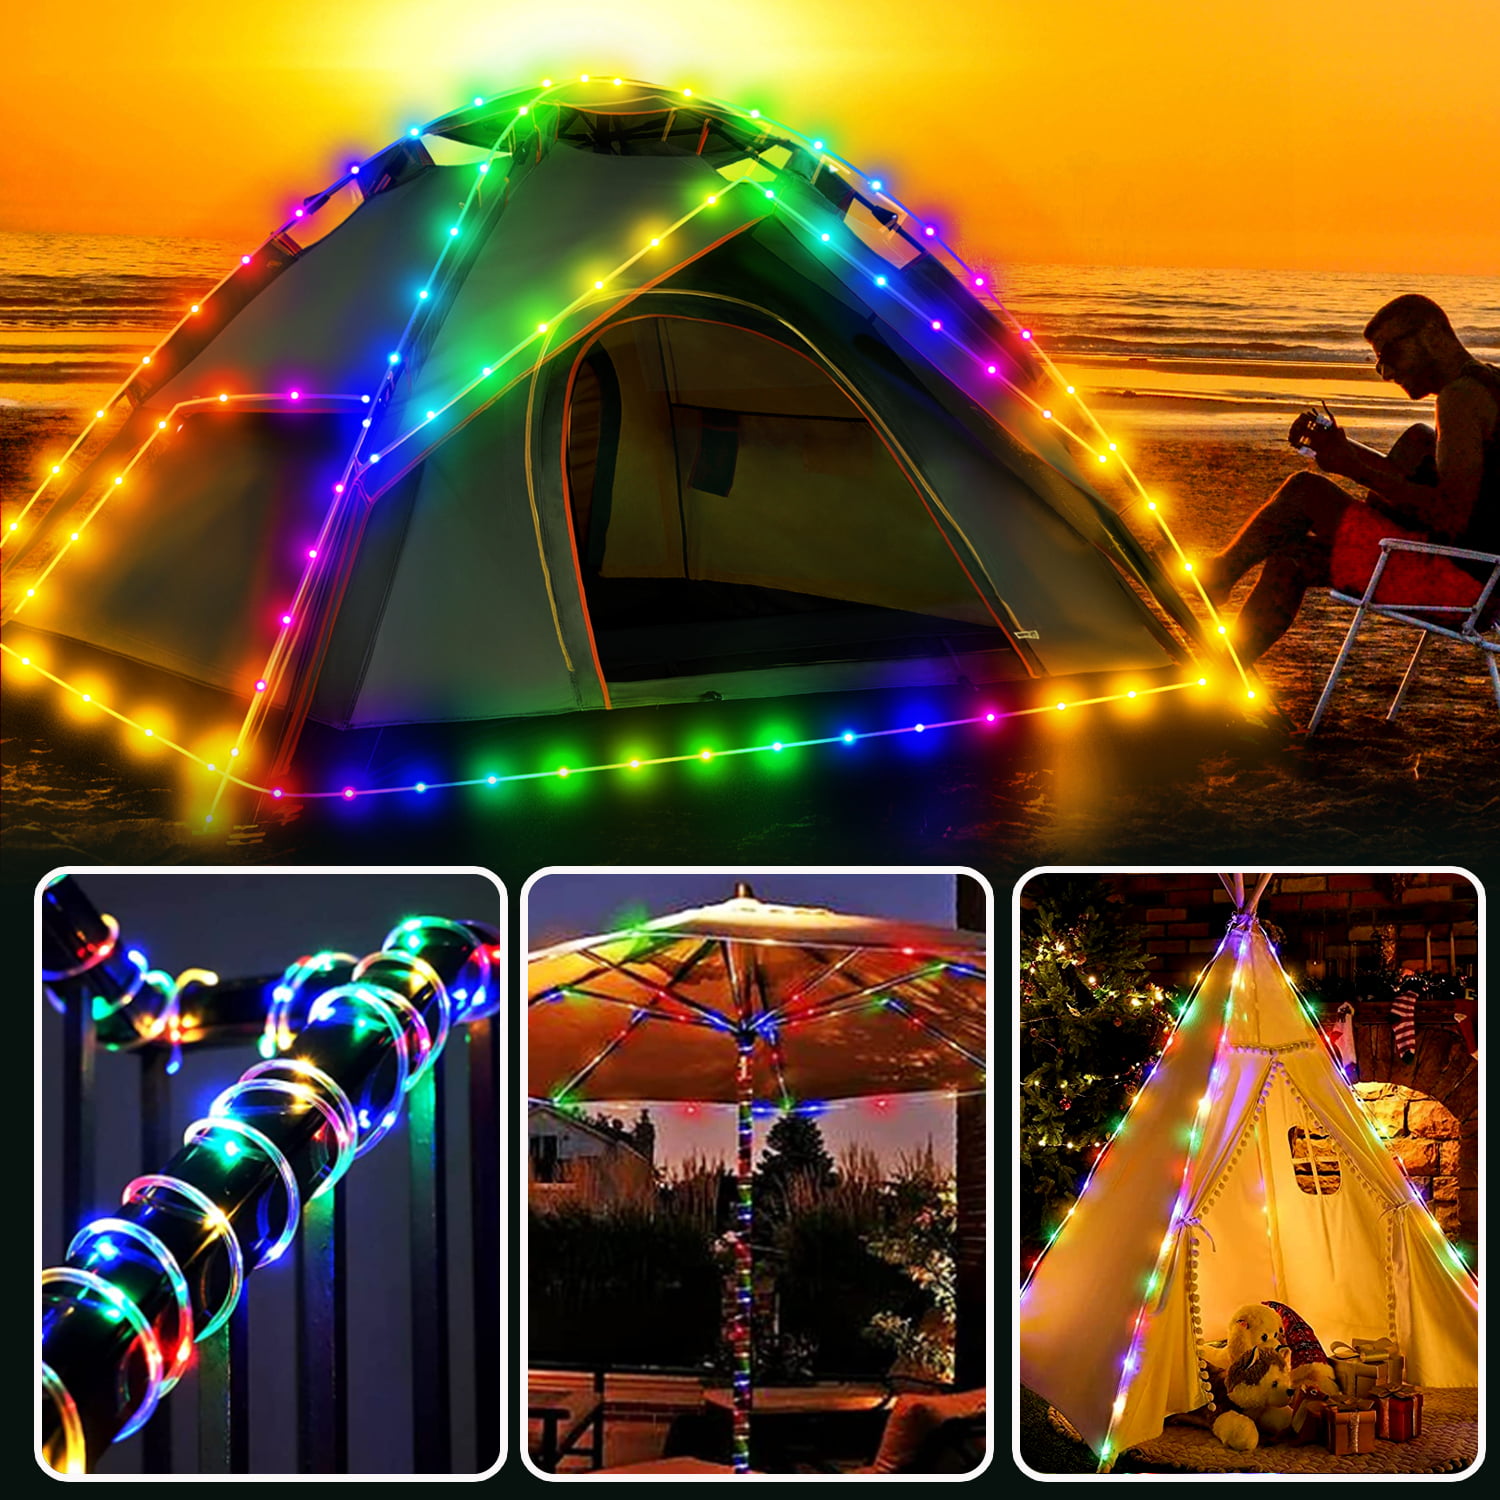 CIWIC Camping Light, 5 Lighting Modes, Length 32.8 ft, Colorful Outdoor  String Lights, Retractable LED Strip, Waterproof, Rechargeable, Portable